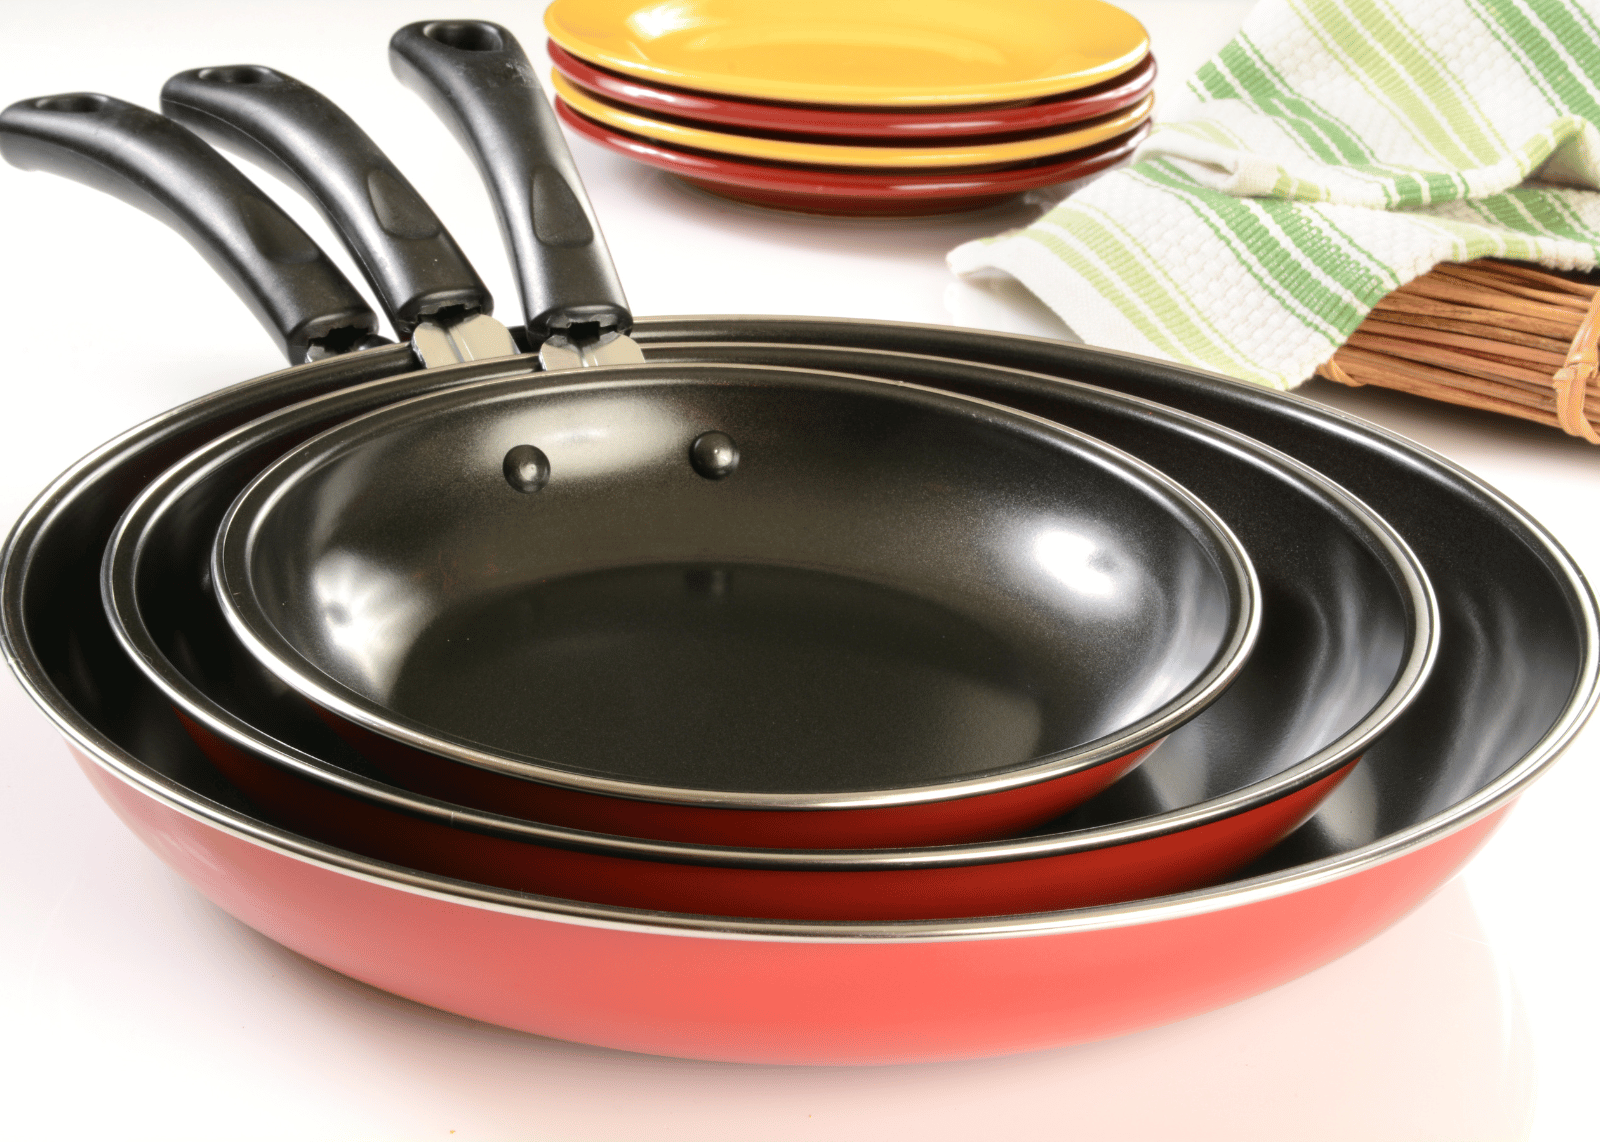 Stop Using Non-Stick Cookware